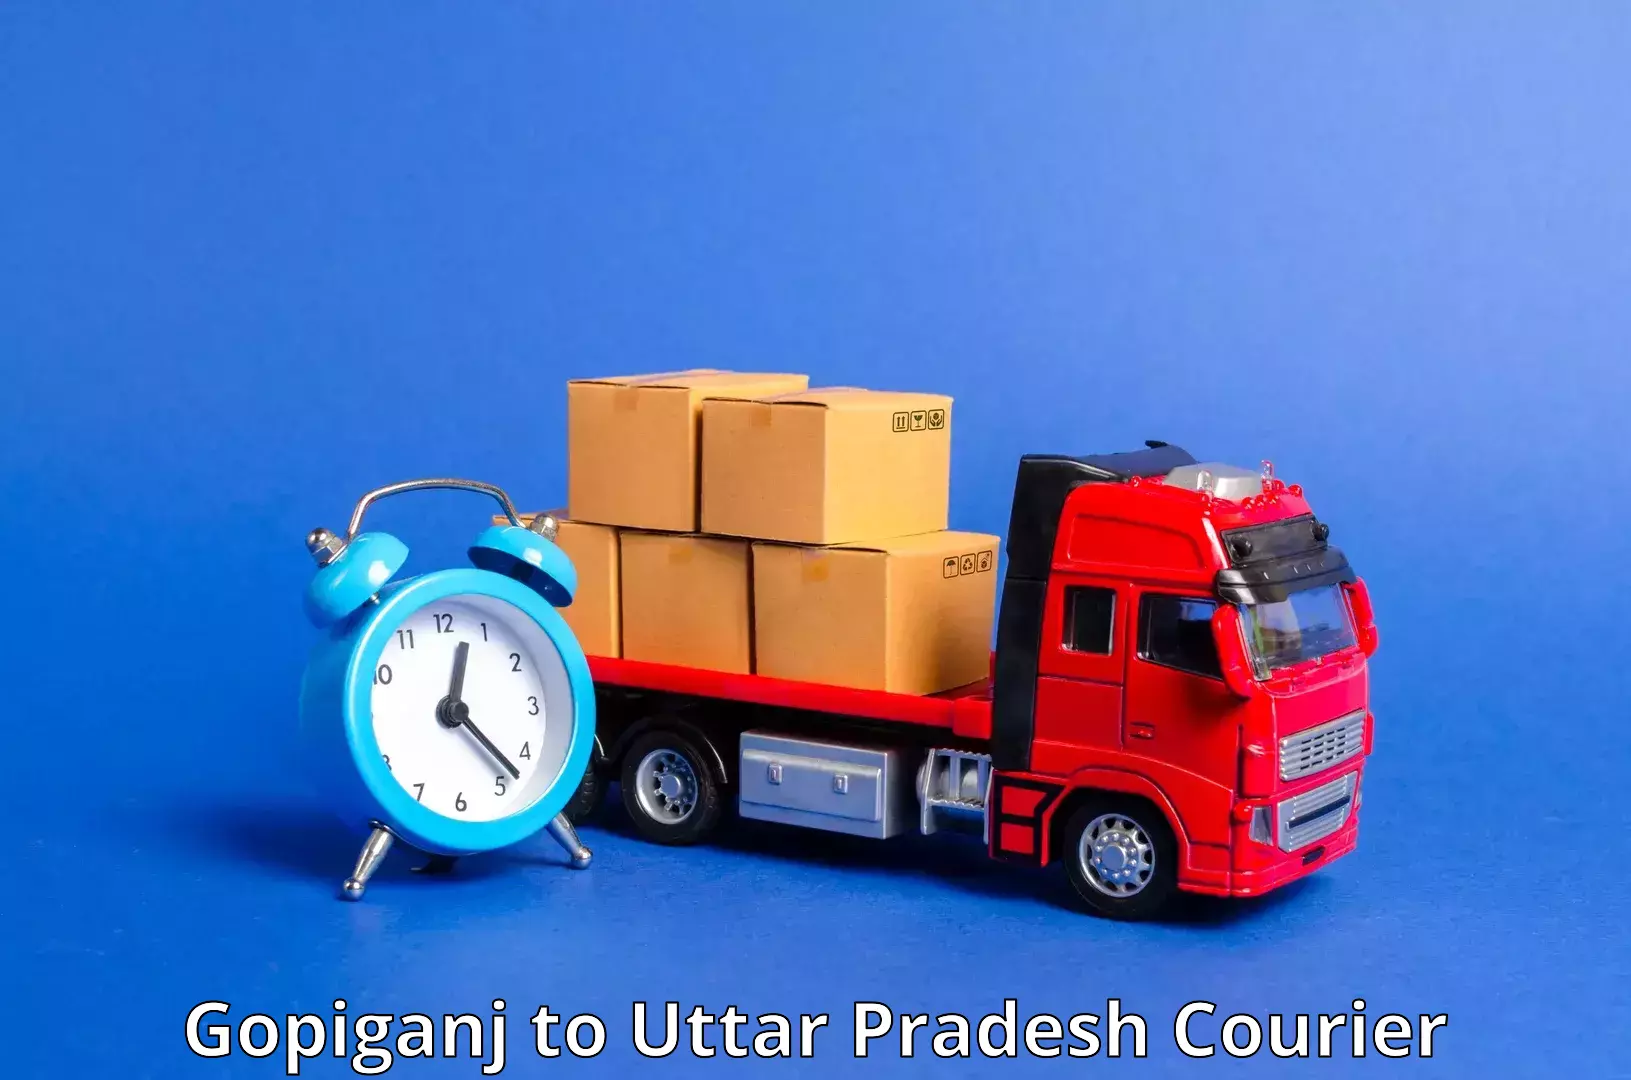 Delivery service partnership Gopiganj to Shahjahanpur